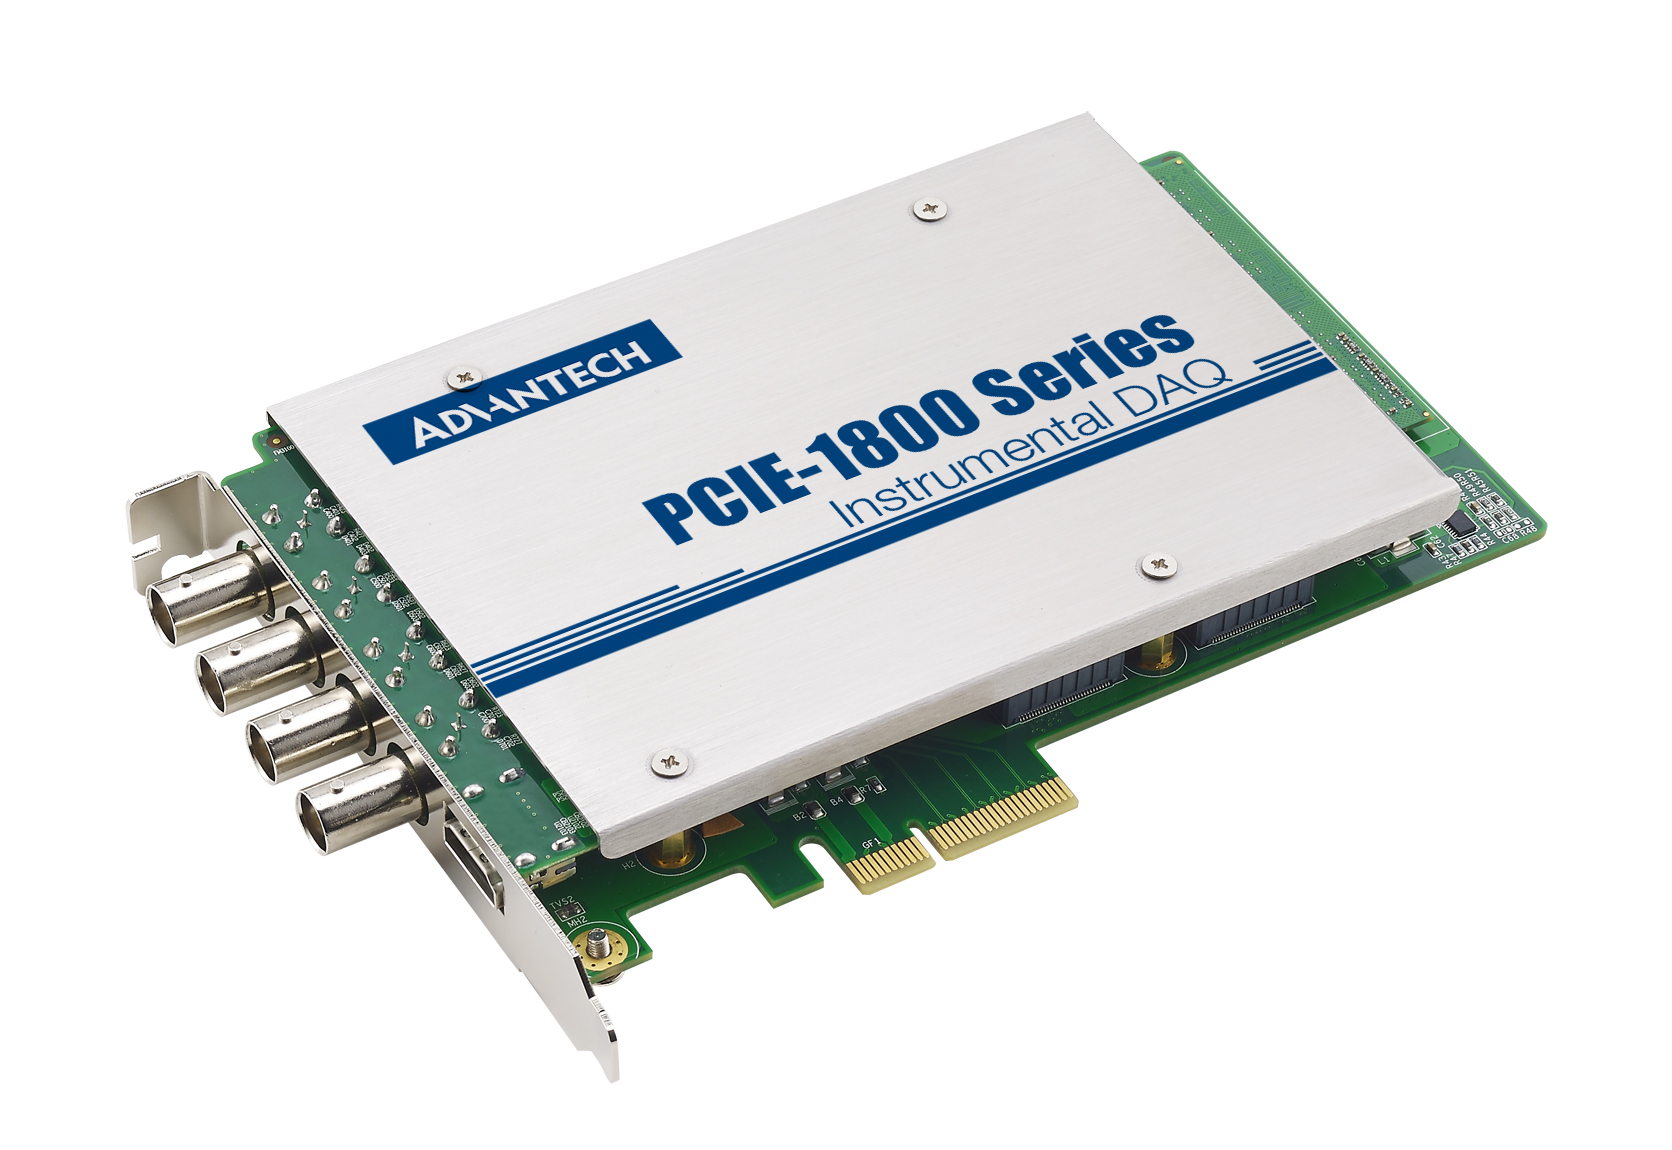 4-channel, 125MS/s Digitizer PCIE Card